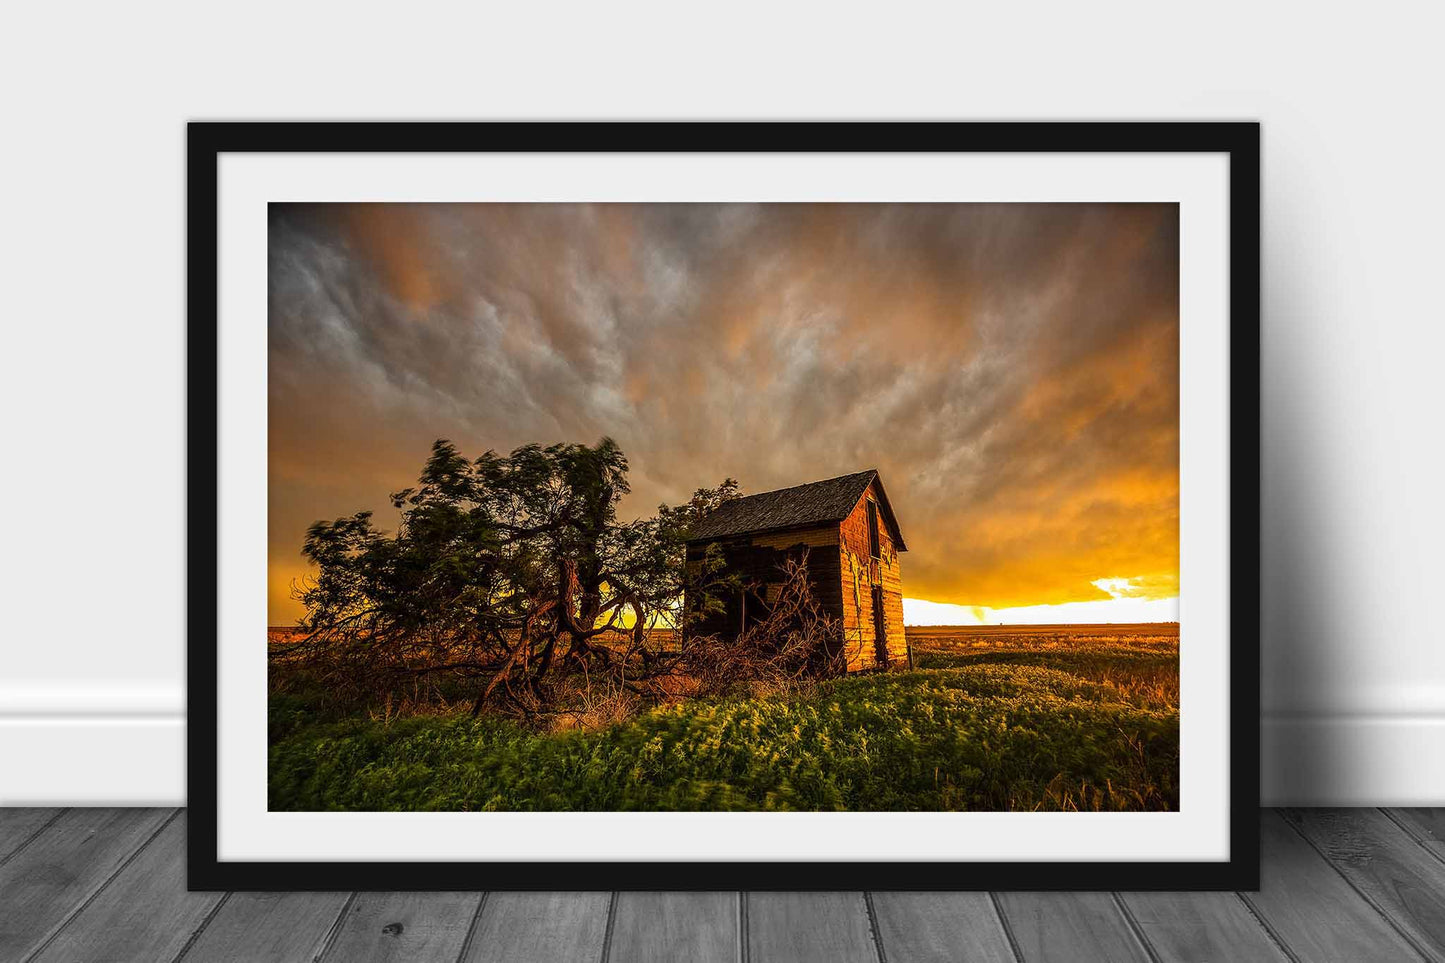 Framed and matted print of an old red barn and windswept tree under a stormy sky at sunset in Oklahoma by Sean Ramsey of Southern Plains Photography.